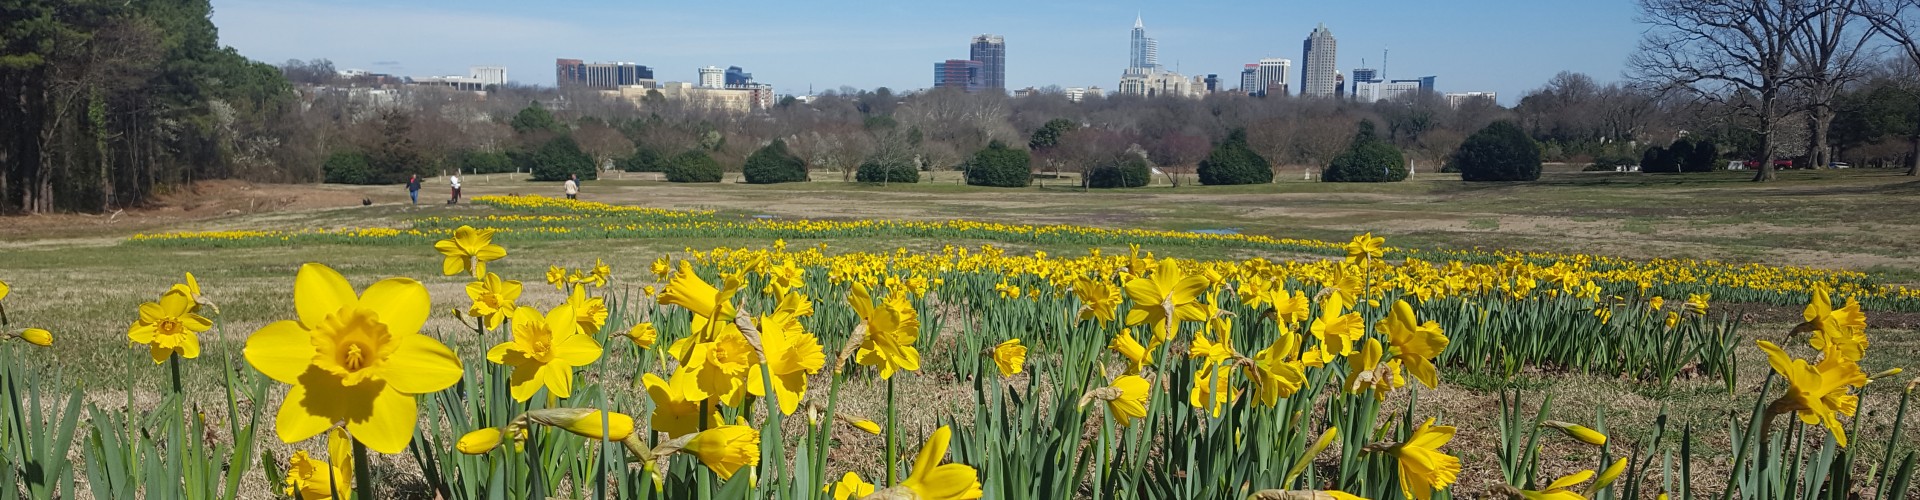 Daffodils in Flowers Field at Dix Park